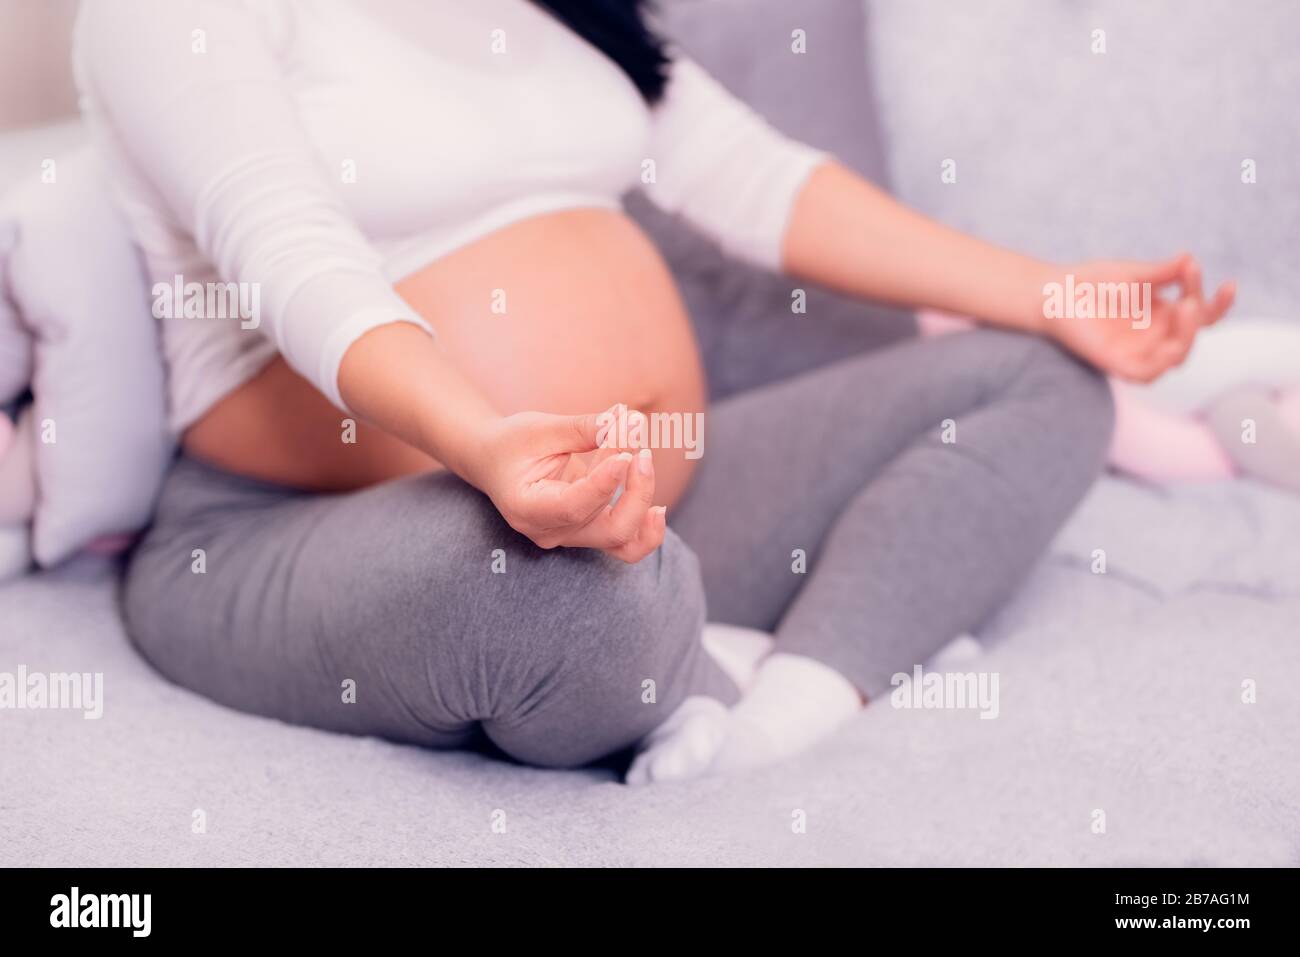 Pregnant woman sitting and relaxing in a lotus position while meditating and exposing her large belly. Stock Photo